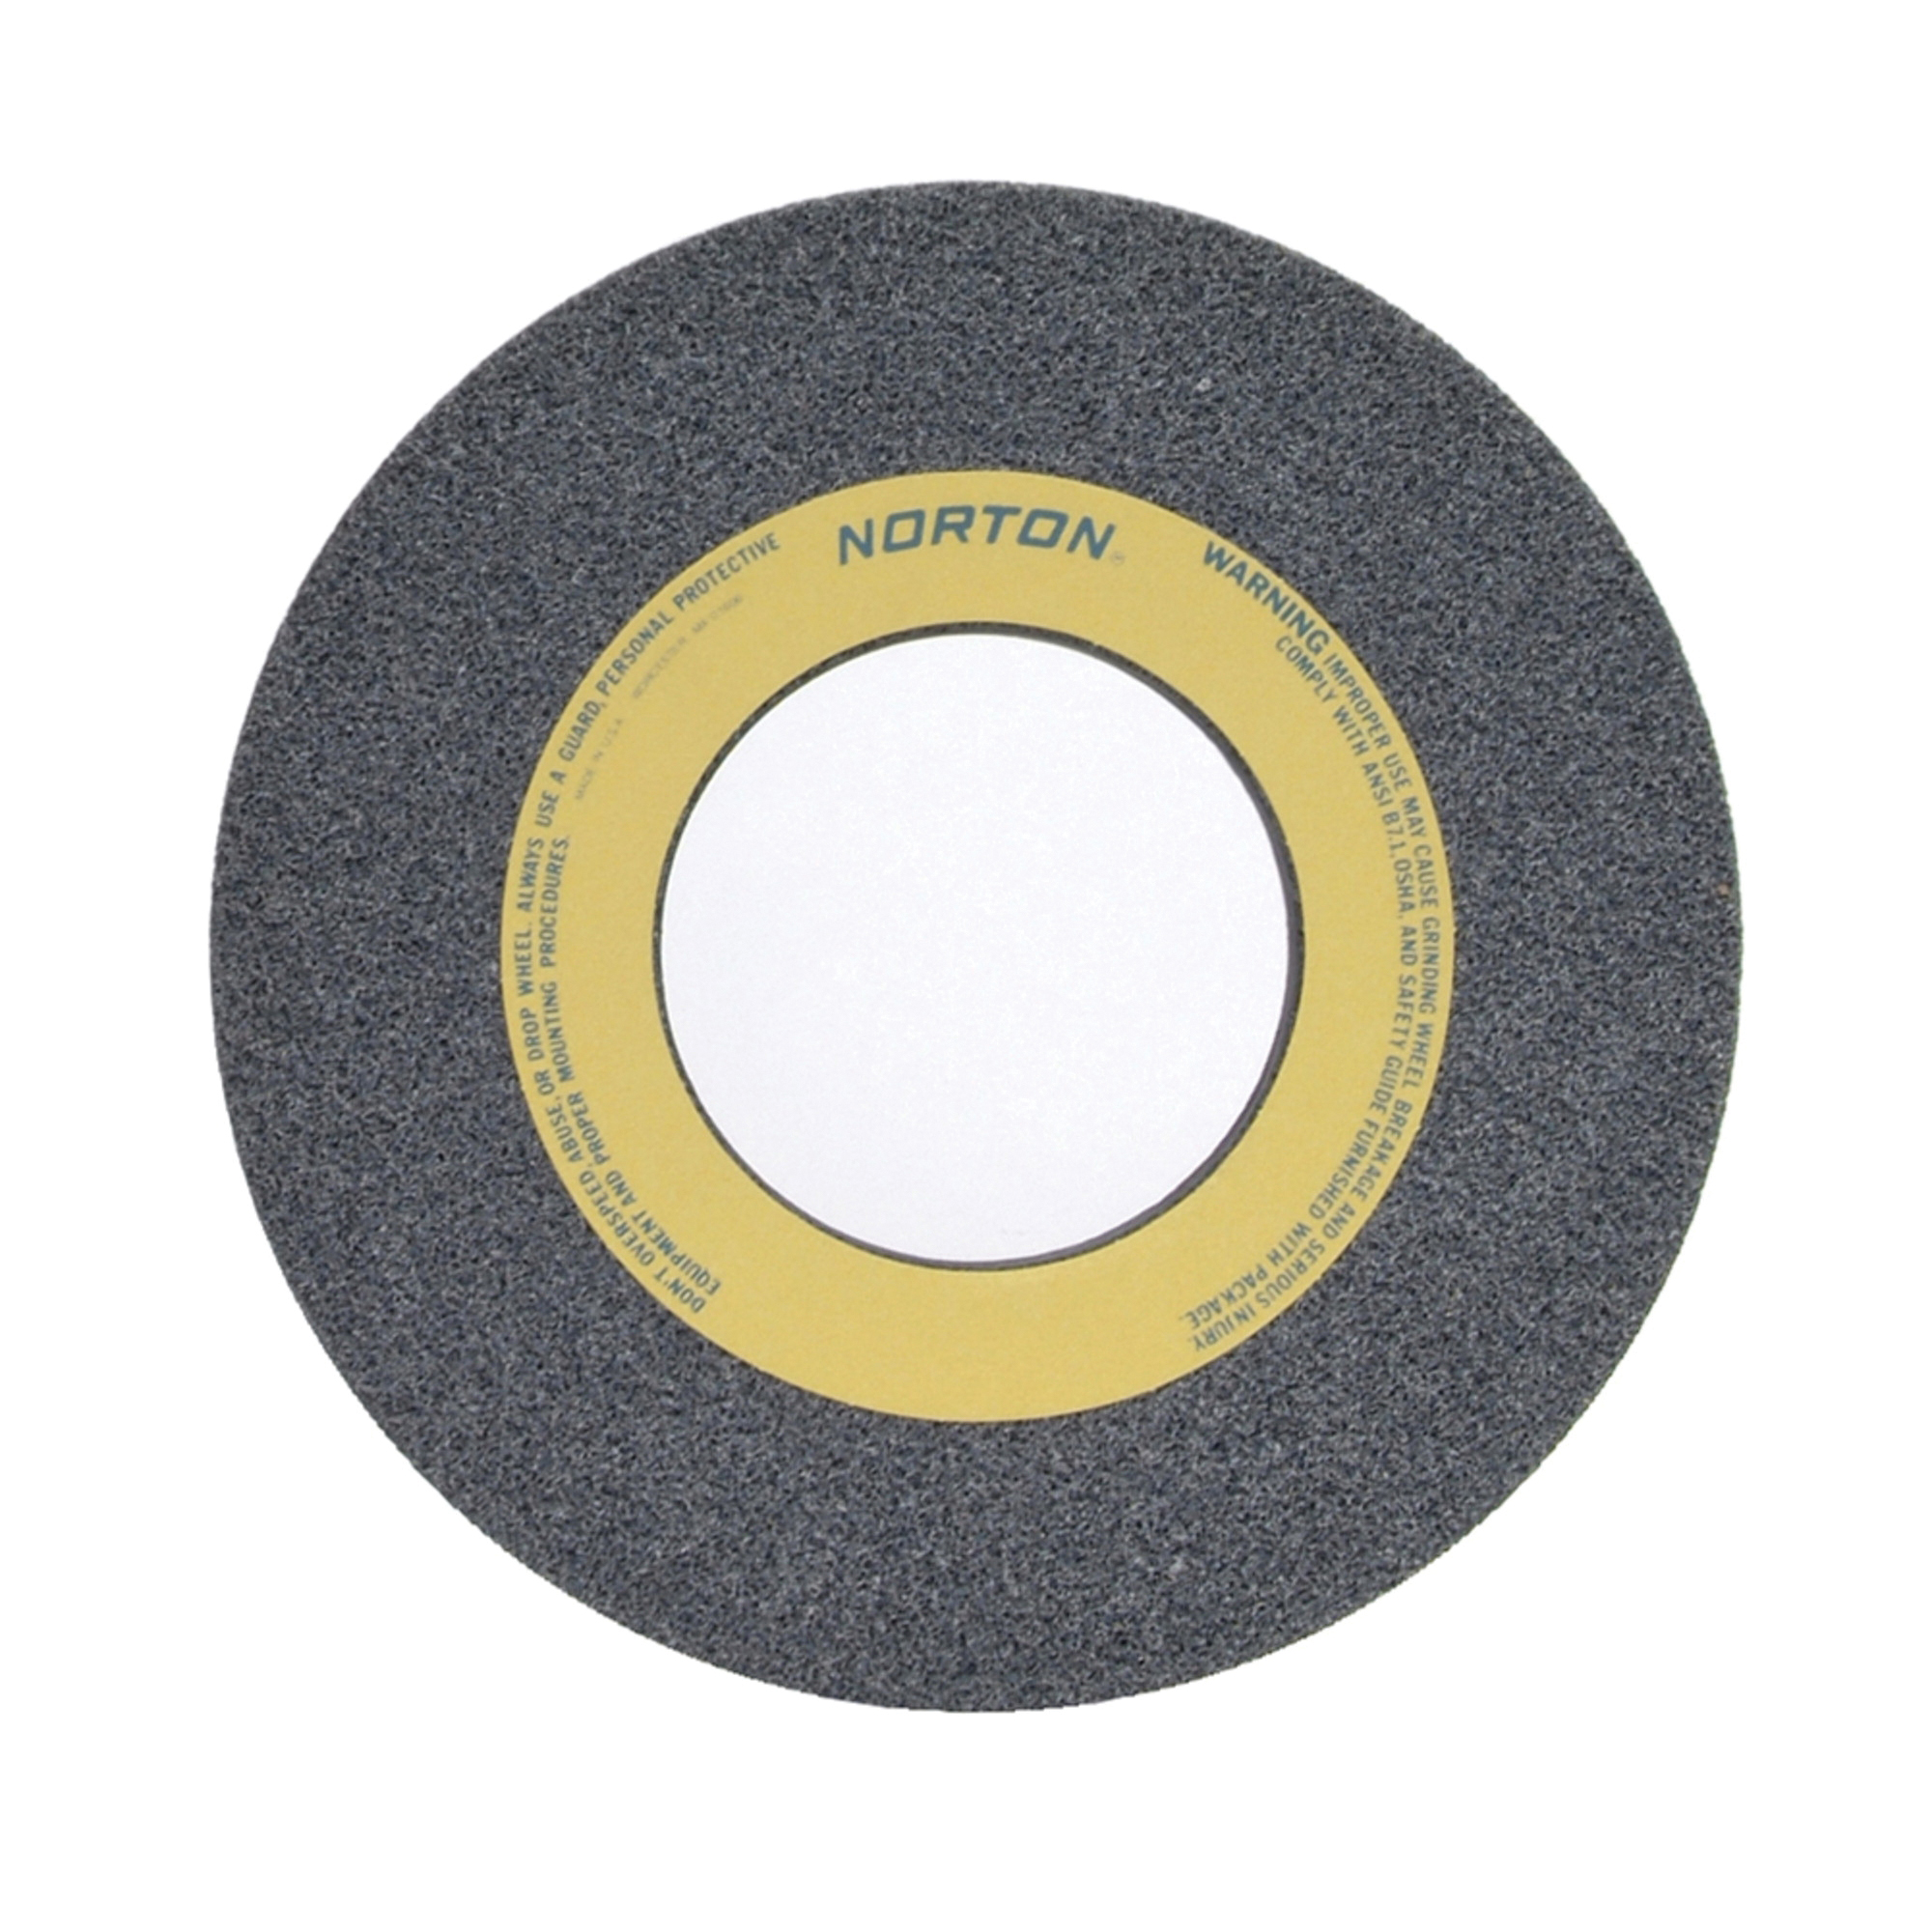 Norton® 66253262077 32AA Straight Toolroom Wheel, 12 in Dia x 1 in THK, 5 in Center Hole, 46 Grit, Aluminum Oxide Abrasive